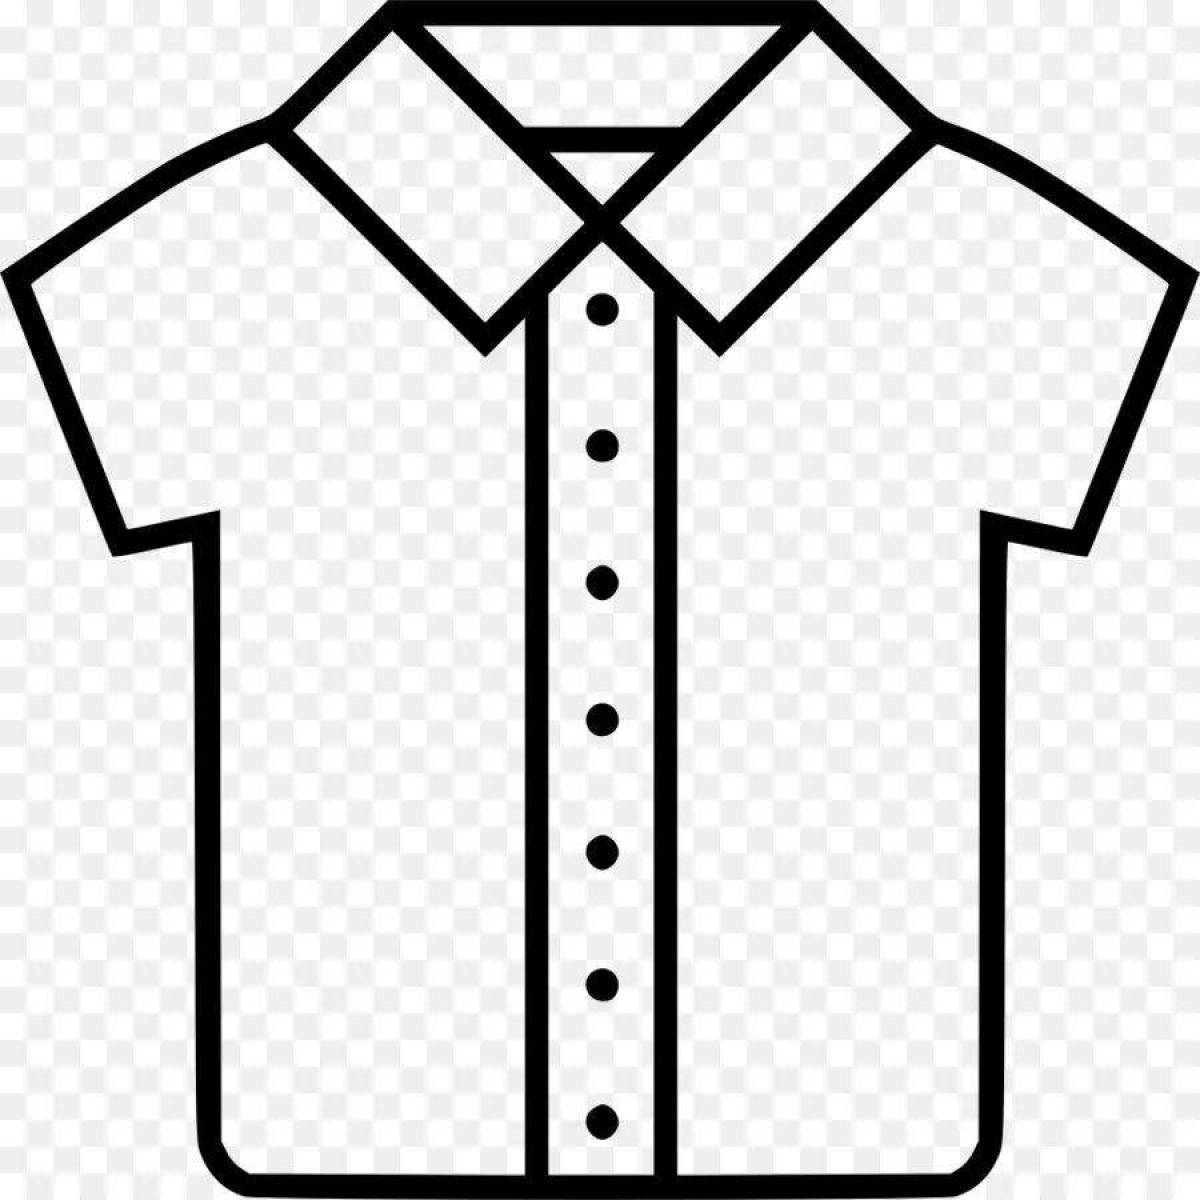 Colored shirt coloring page for children 2-3 years old